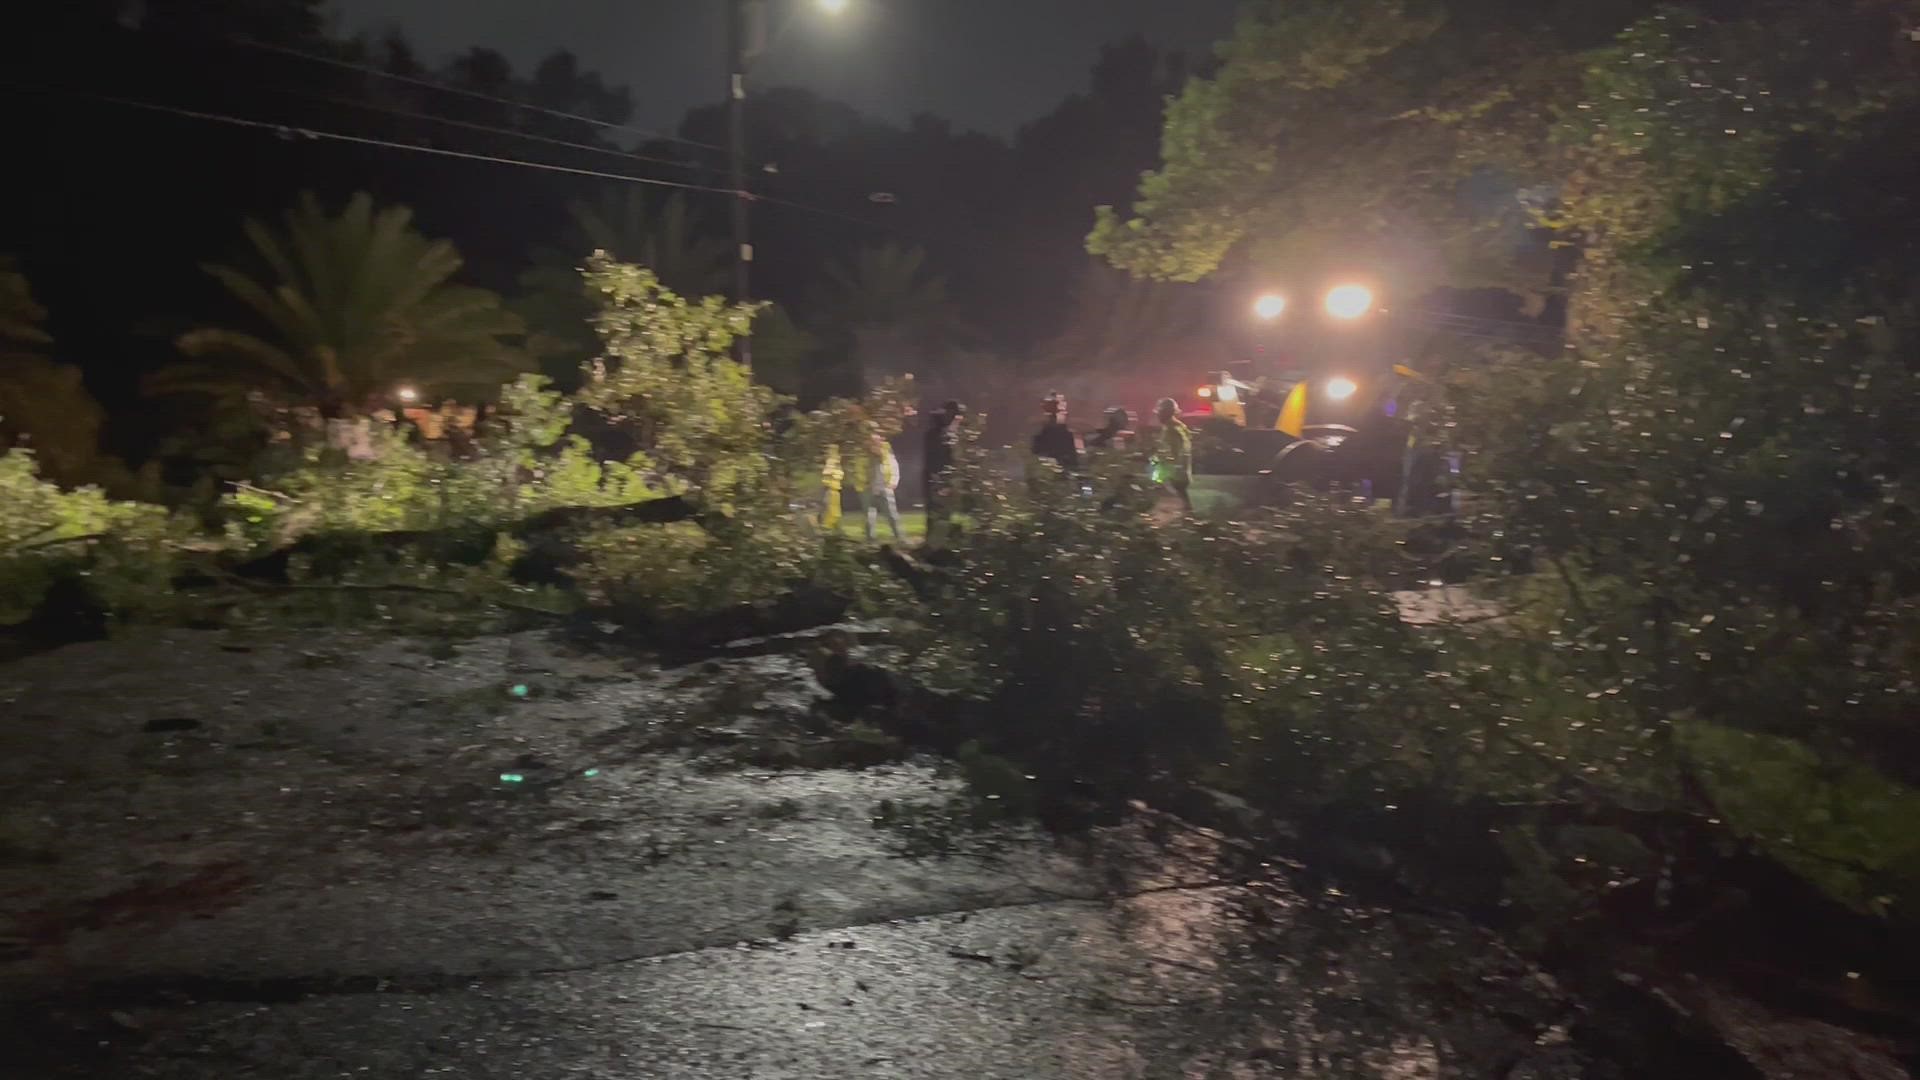 Officials are responding to help move a downed tree that fell during rain caused by Hurricane Ian.